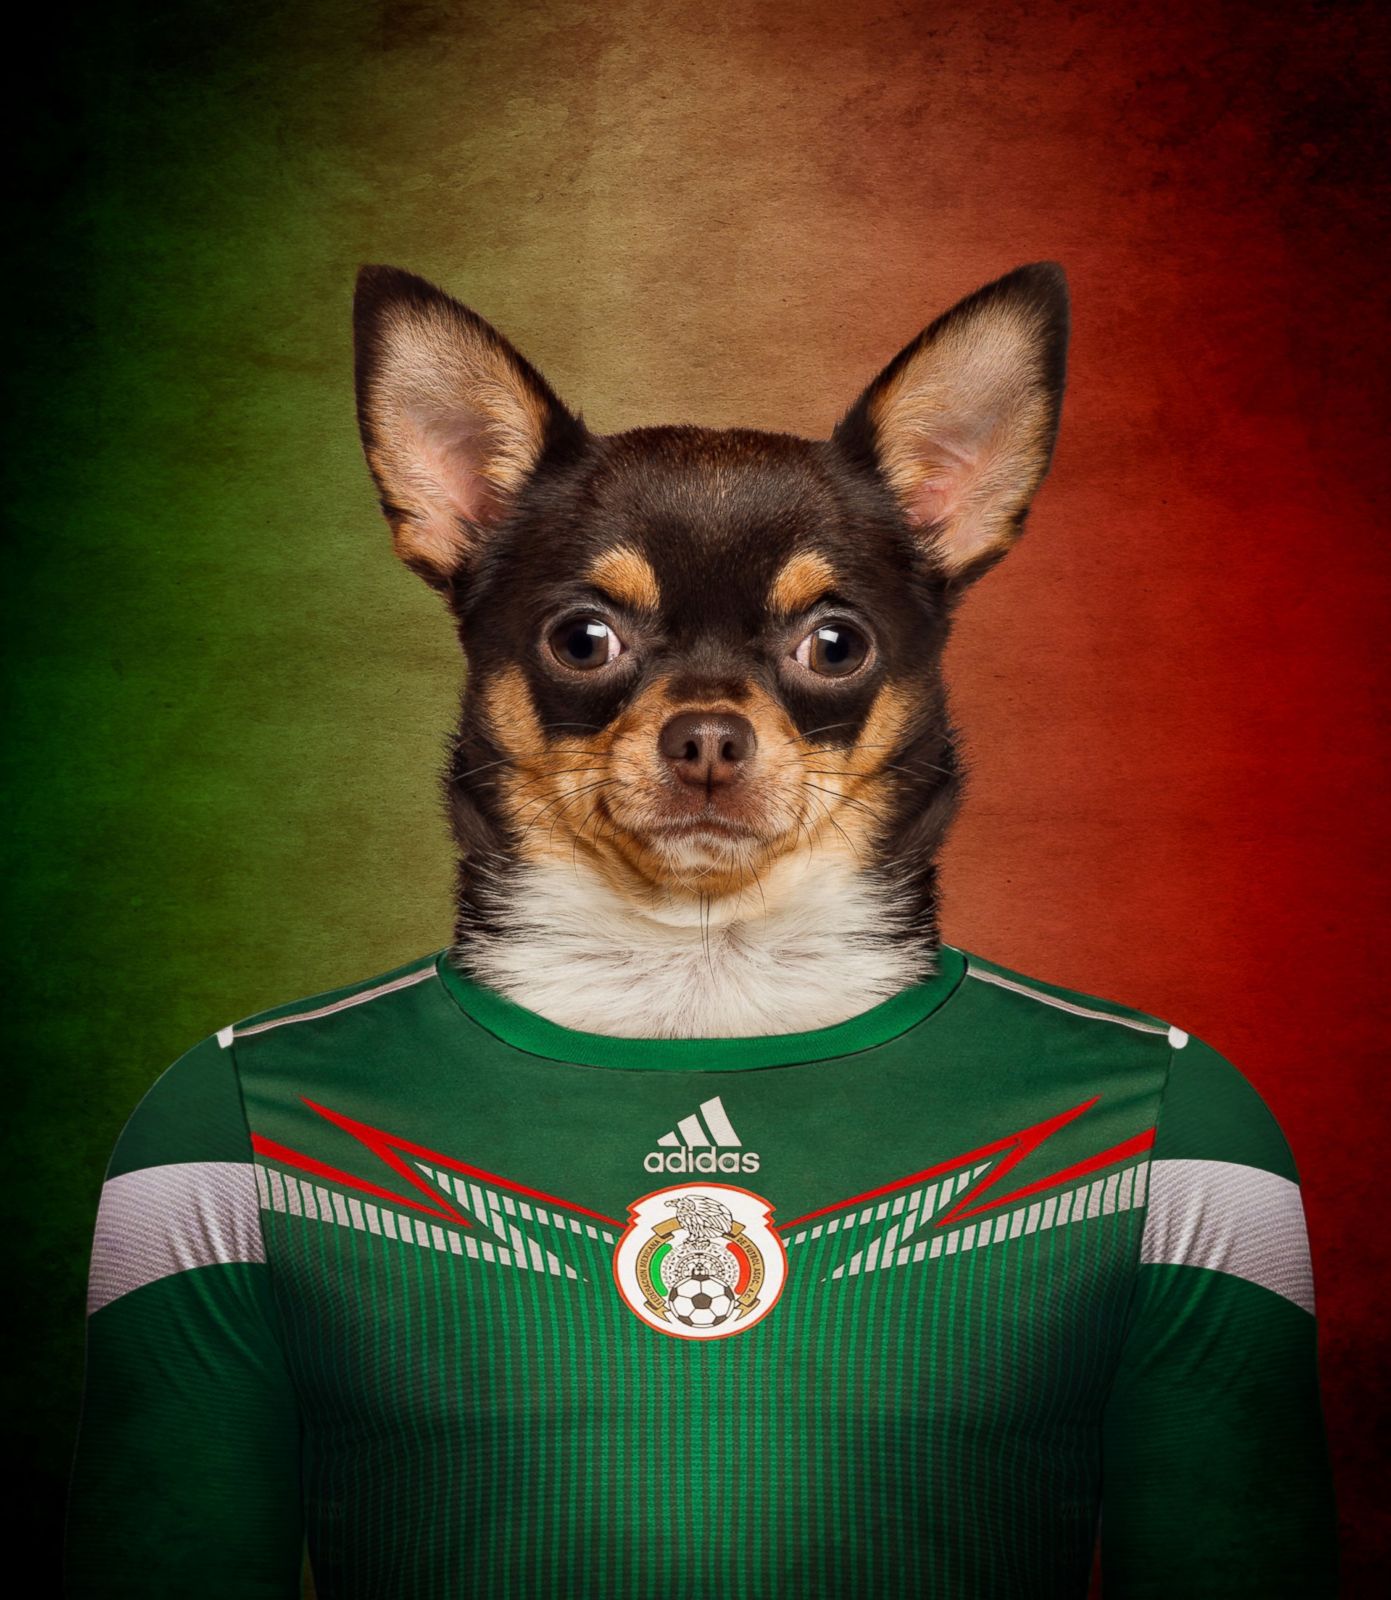 The World's Pups Dress for the World Cup - ABC News